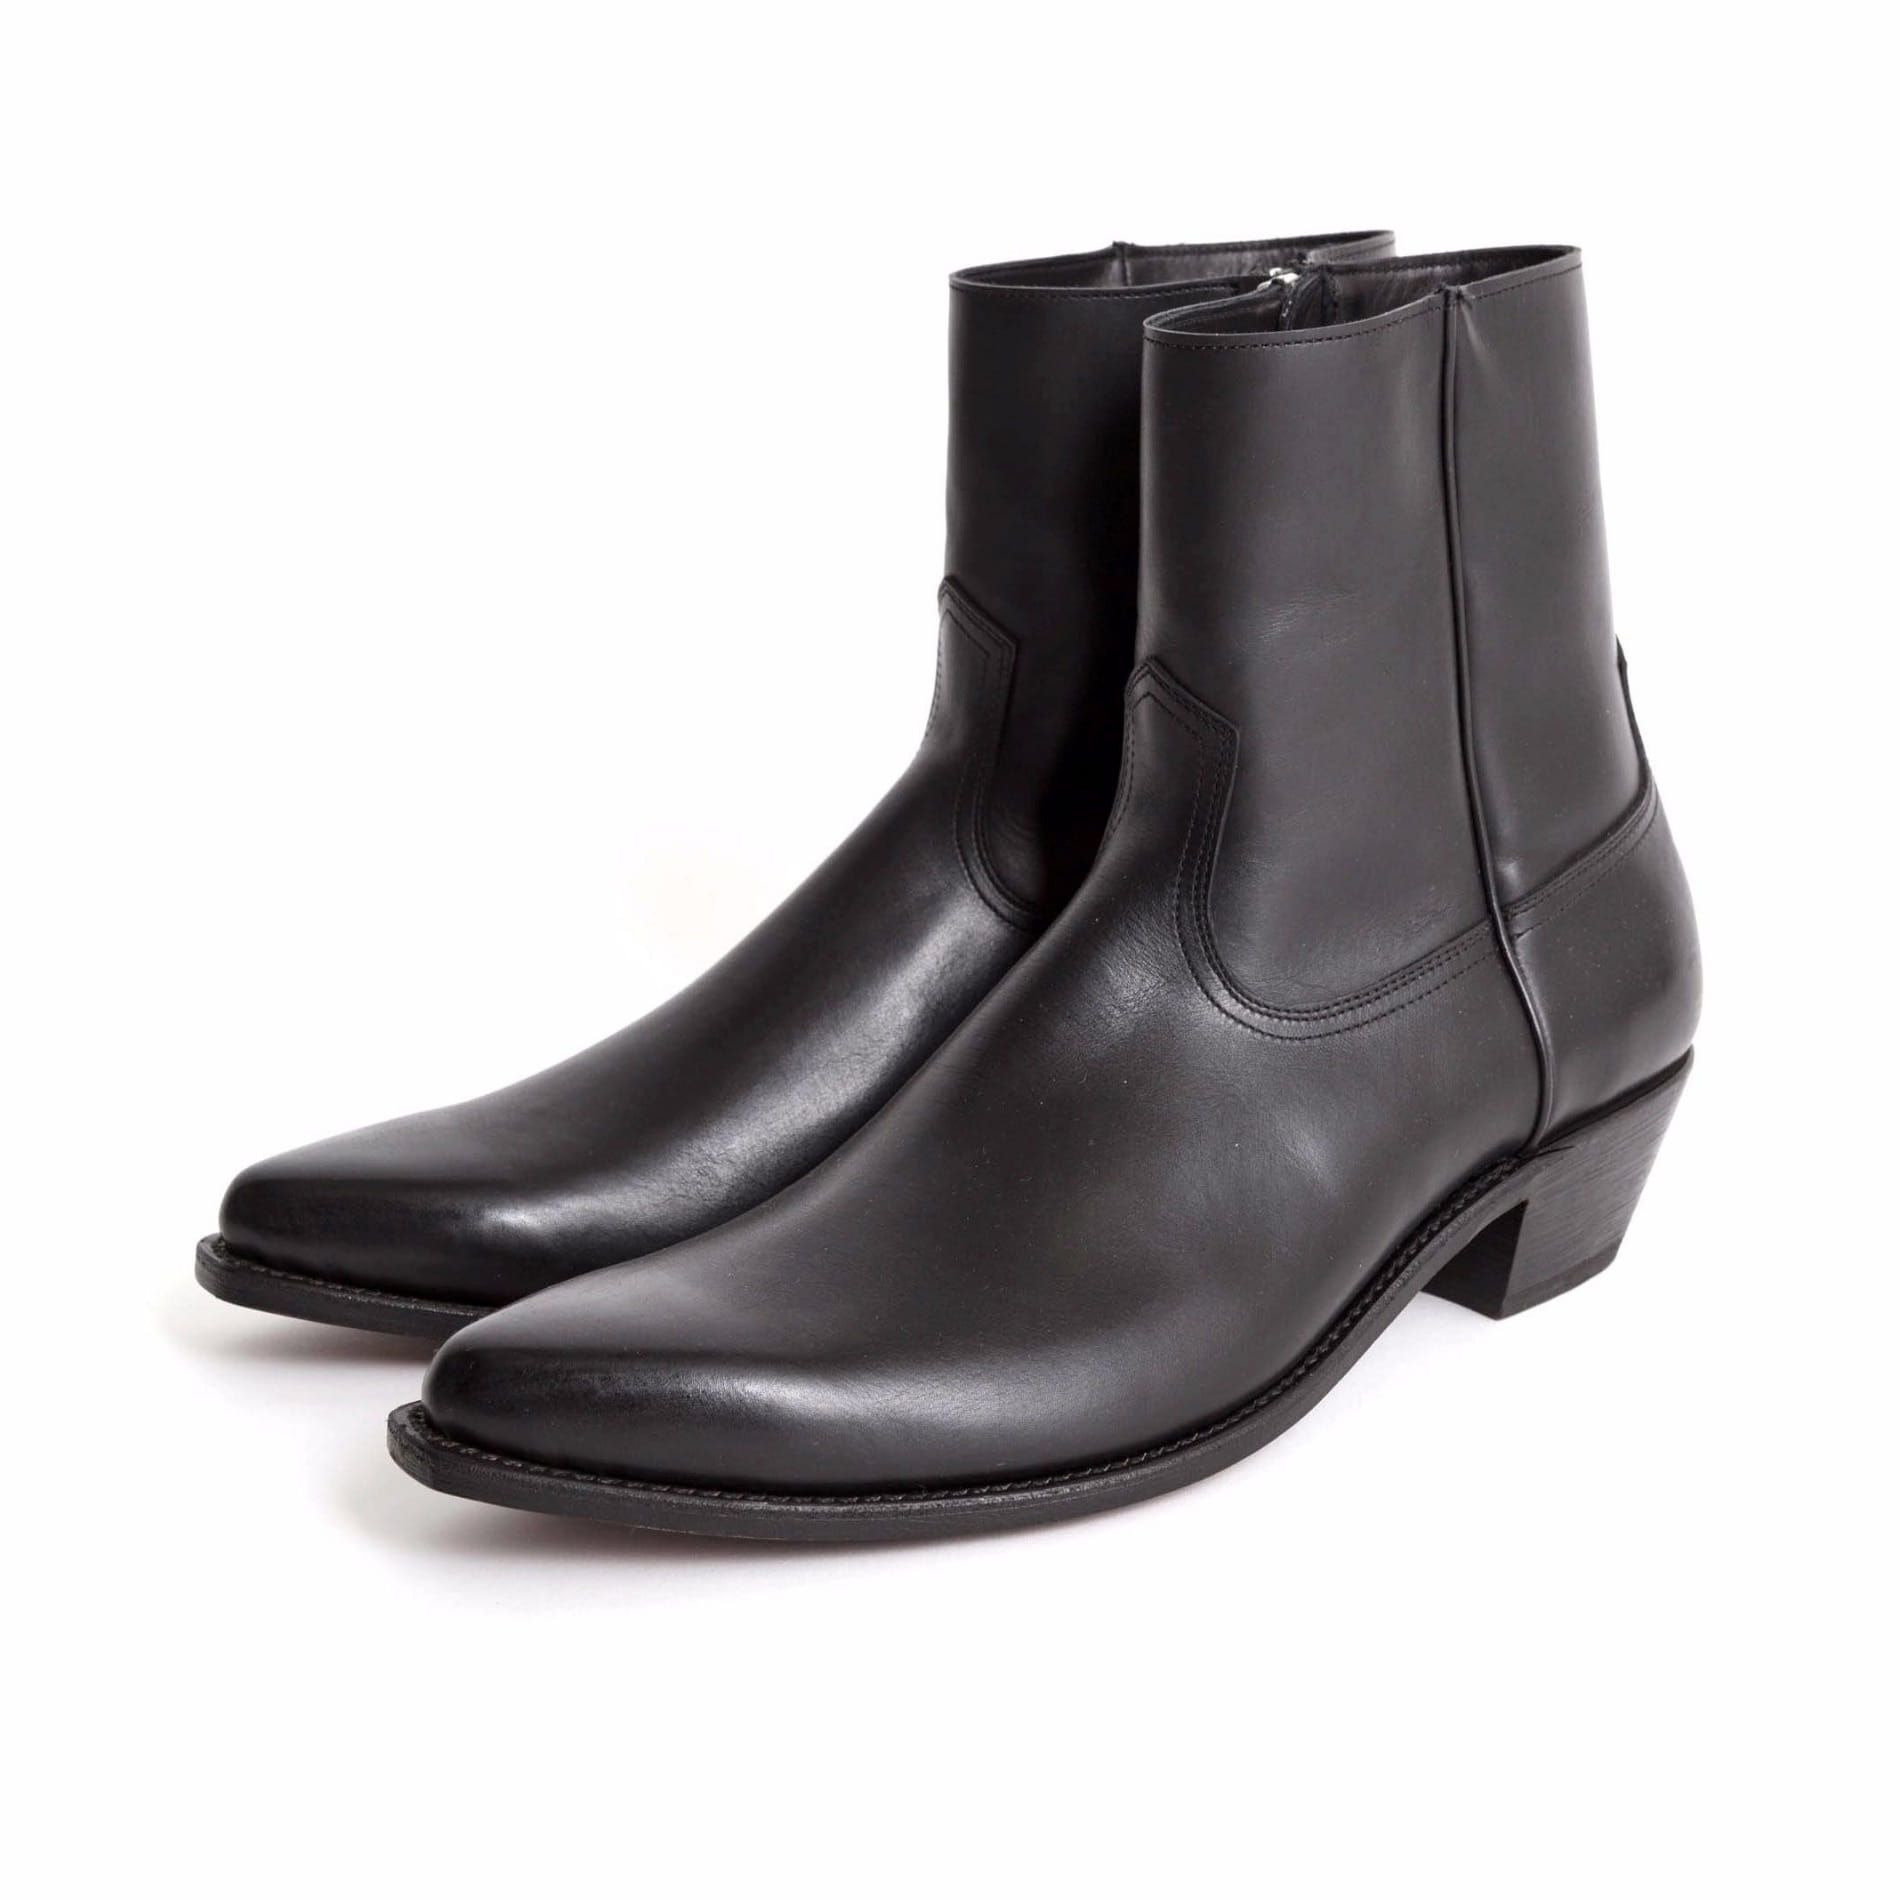 THE LETTERS DRESS SIDE ZIP BOOTS SADDLE CALF LEATHER BLACK